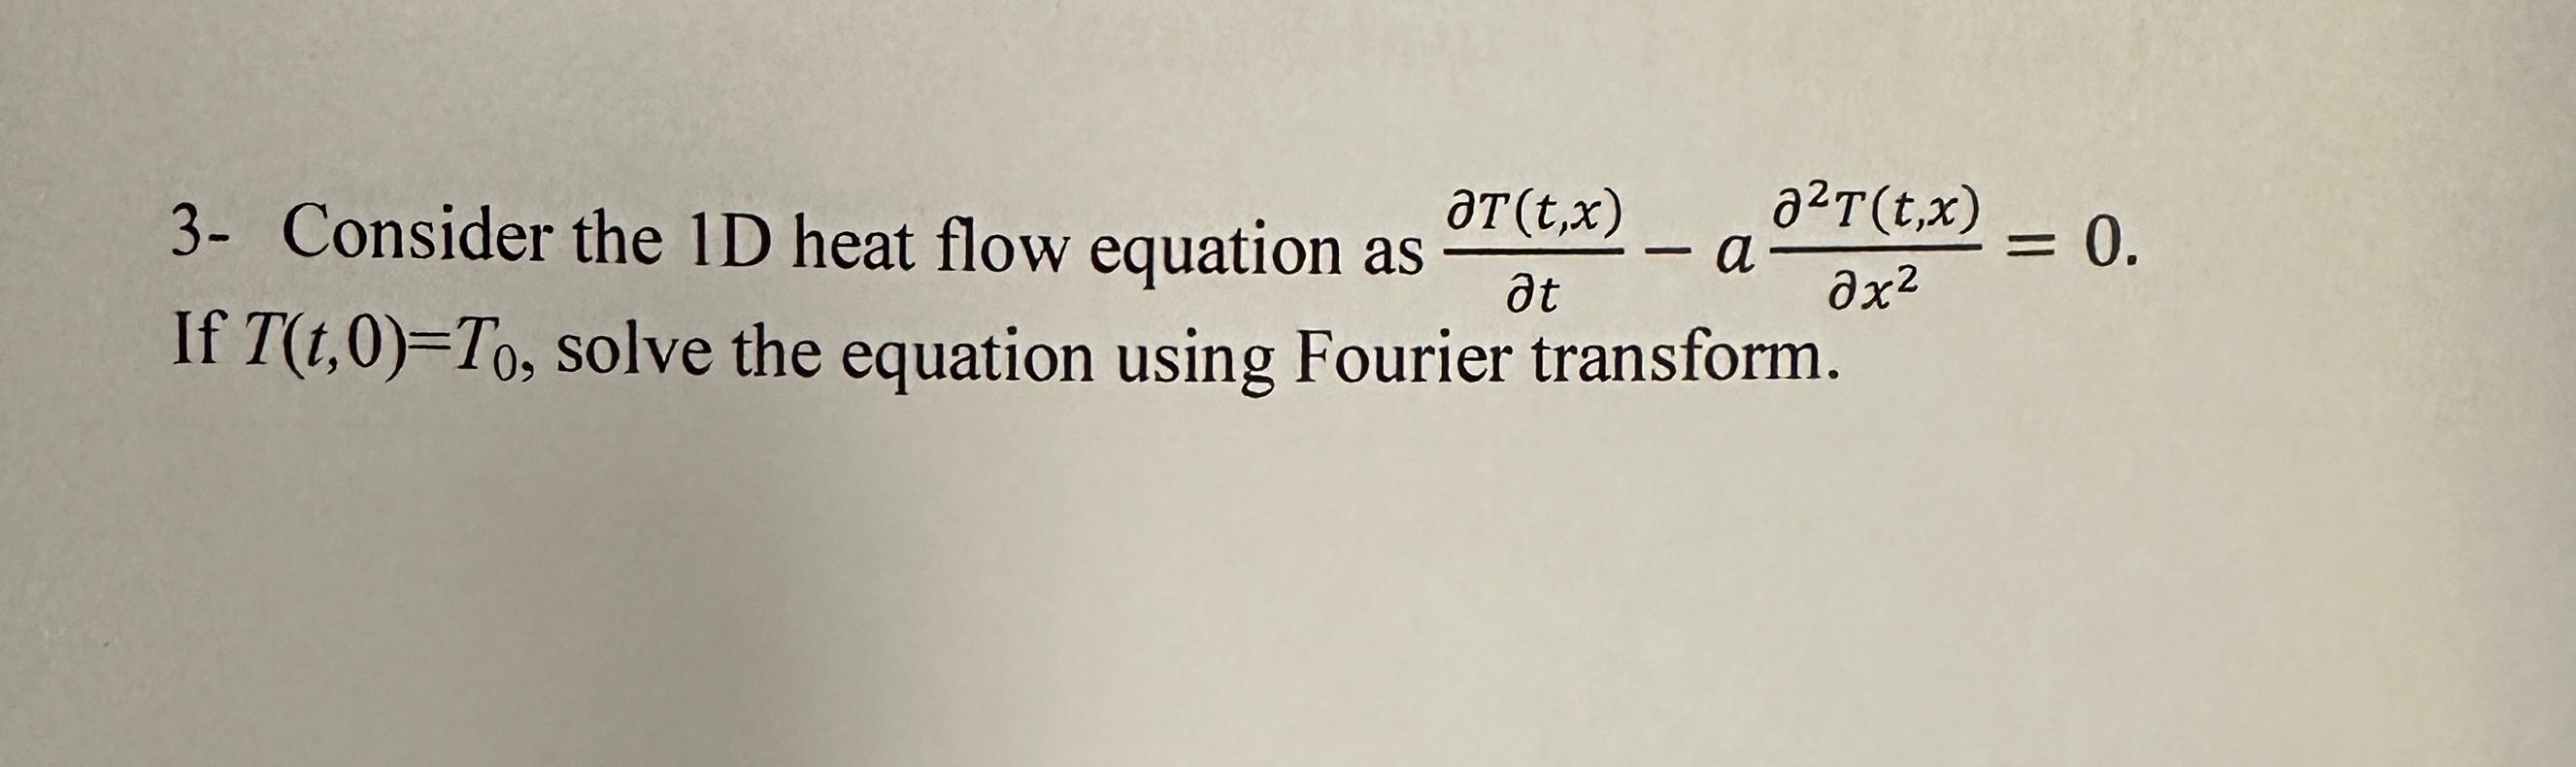 T (t, x) at 3- Consider the 1D heat flow equation as If T(t,0)=To, solve the equation using Fourier